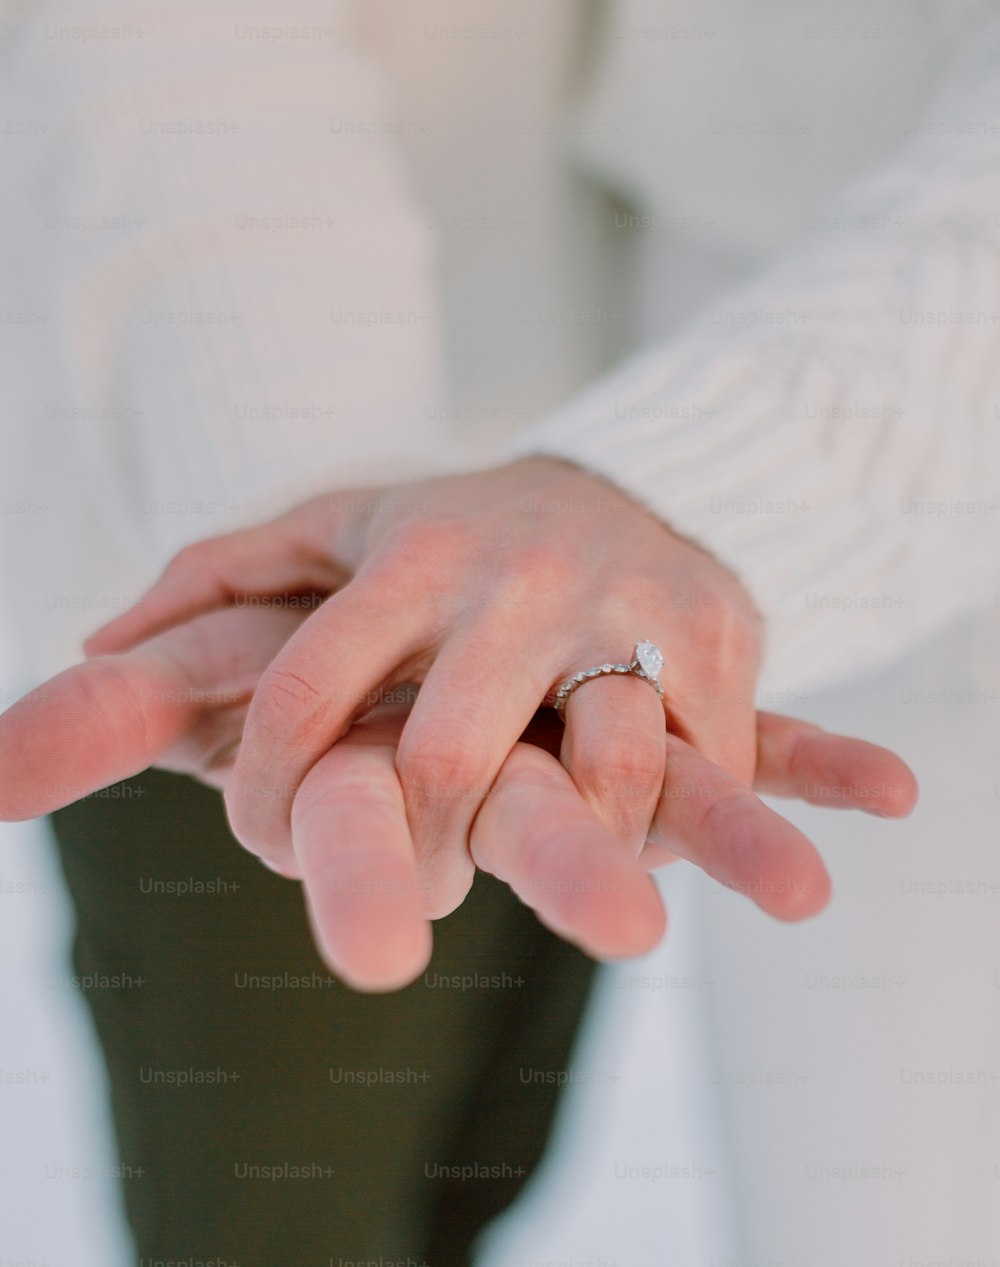 a close up of a person holding a wedding ring